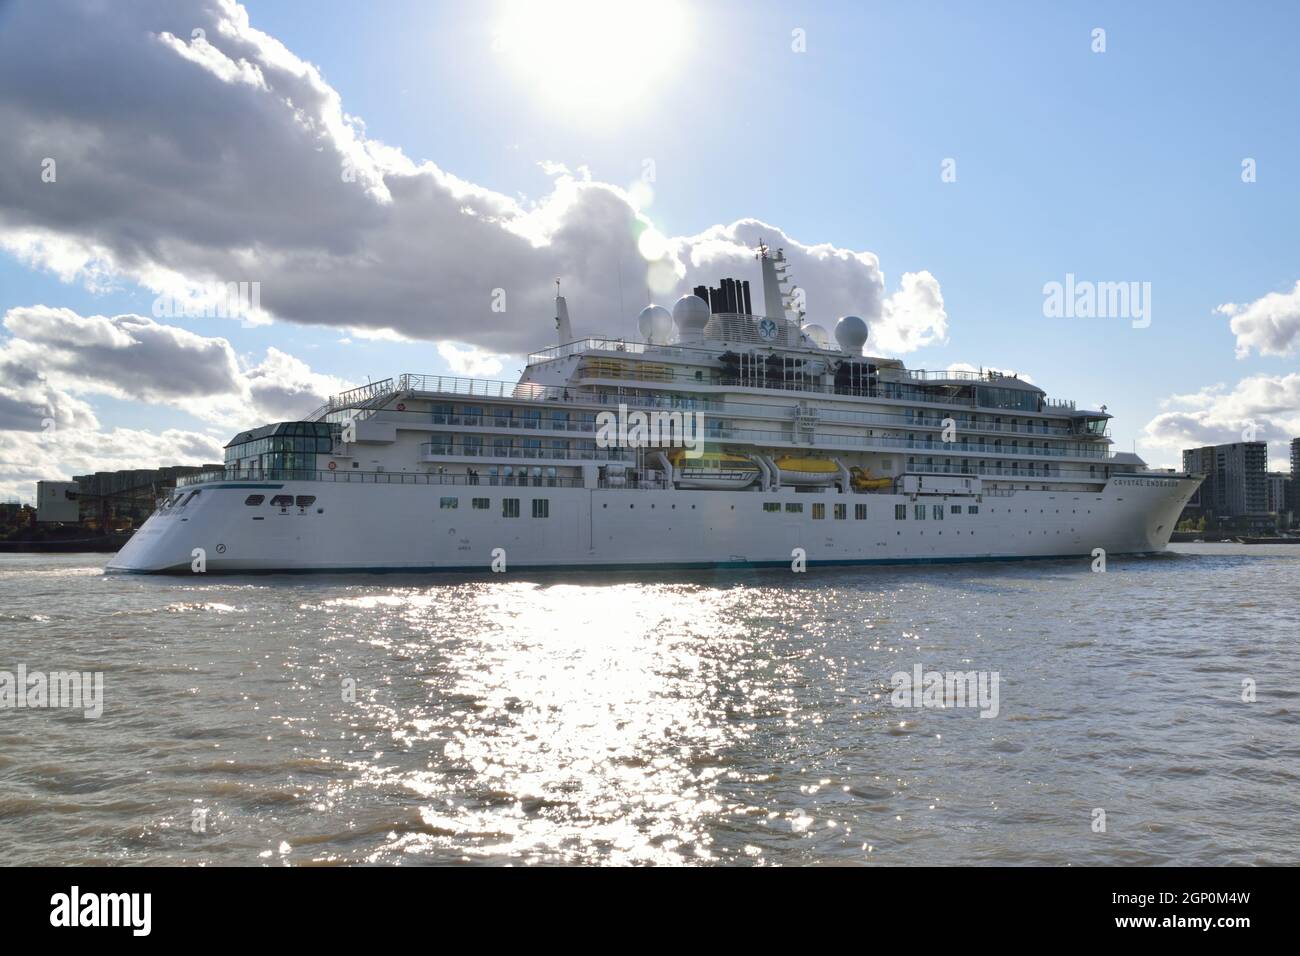 Crystal Endeavour, a 6* luxury expedition ship, operated by Crystal Cruises  arrives on the River Thames to make it's maiden port call in London with a visit to Greenwich. Stock Photo